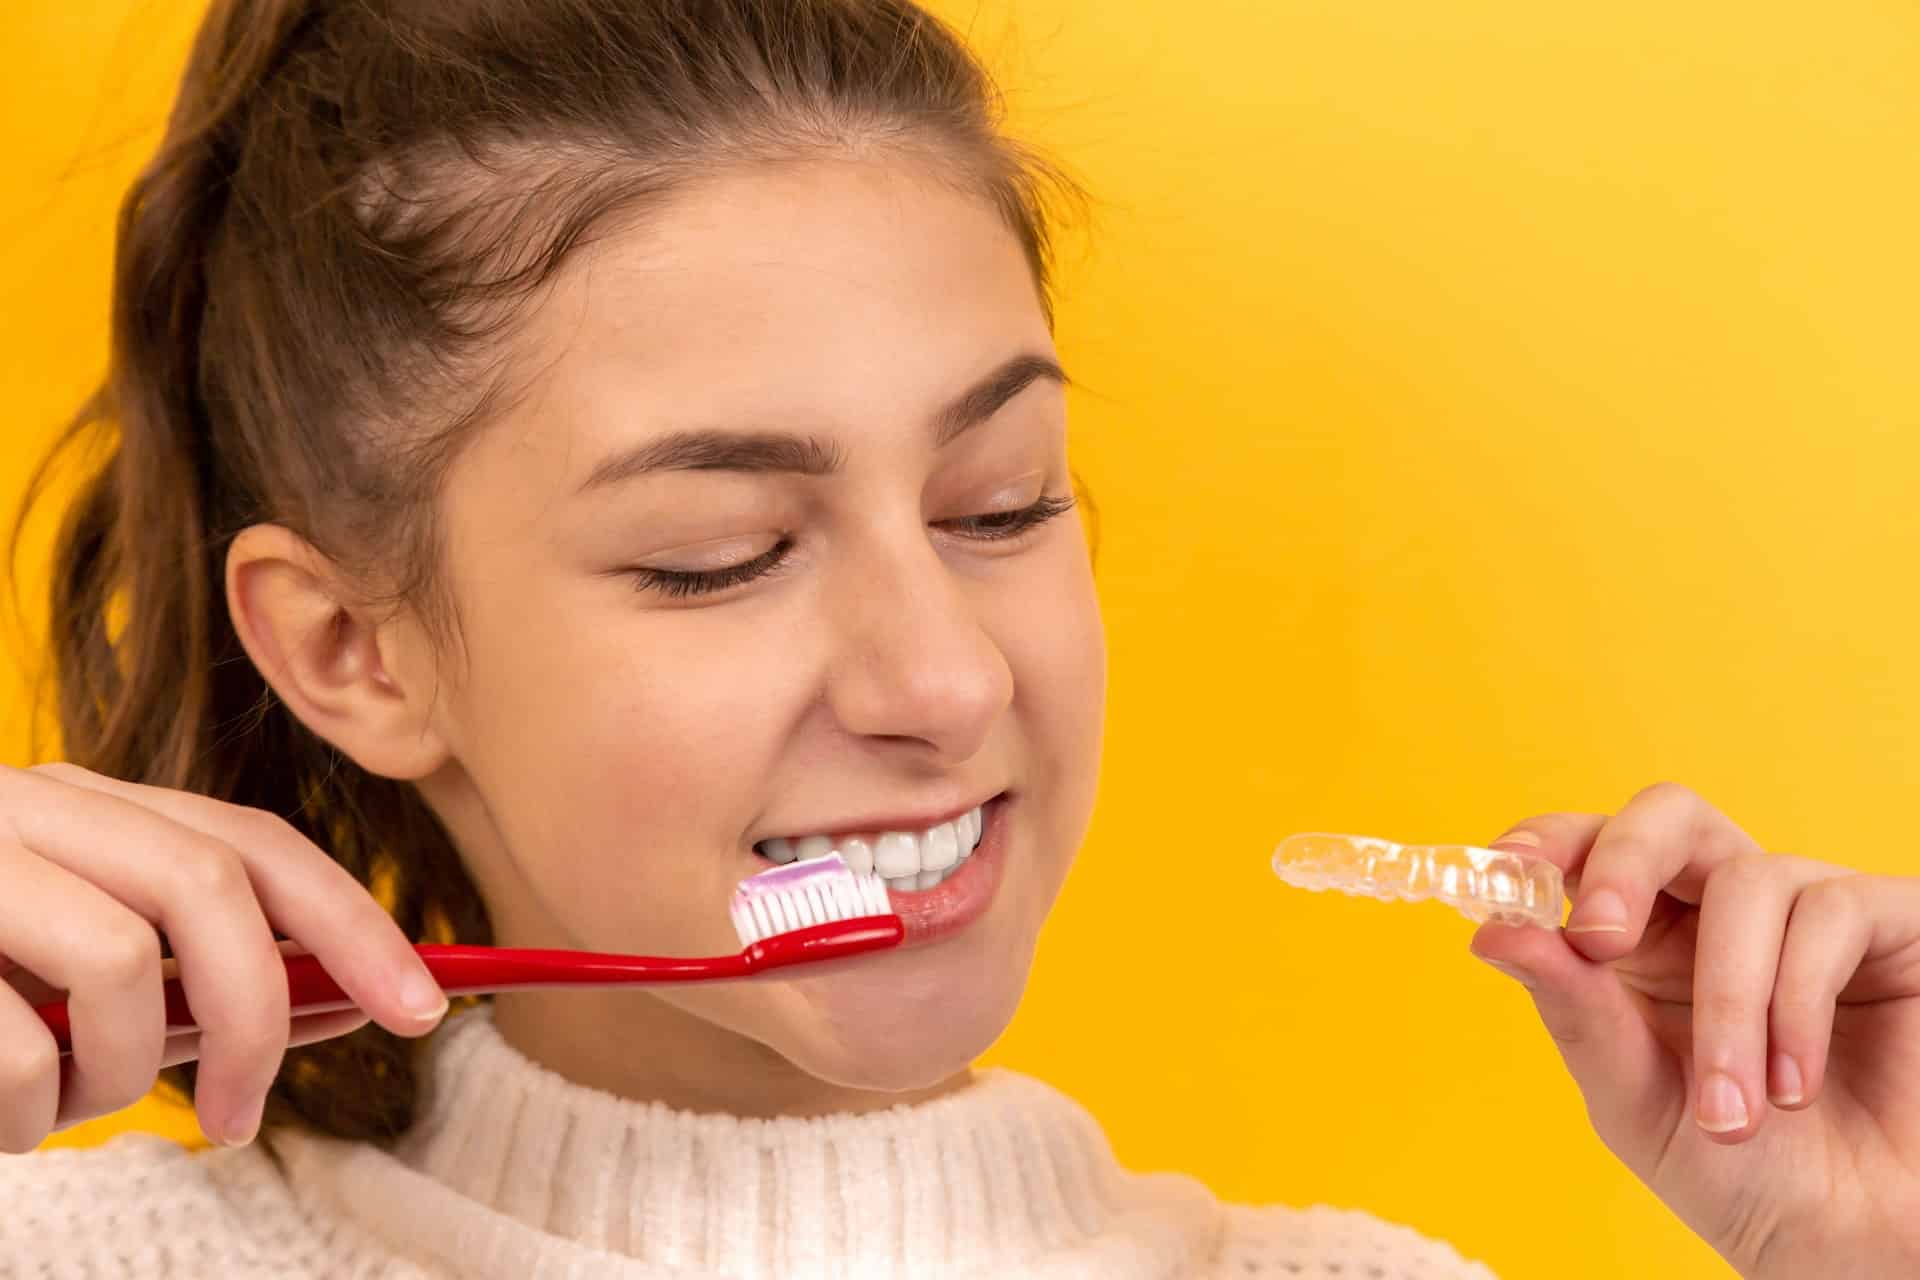 how to clean invisalign - woman holding toothbrush and clear aligner